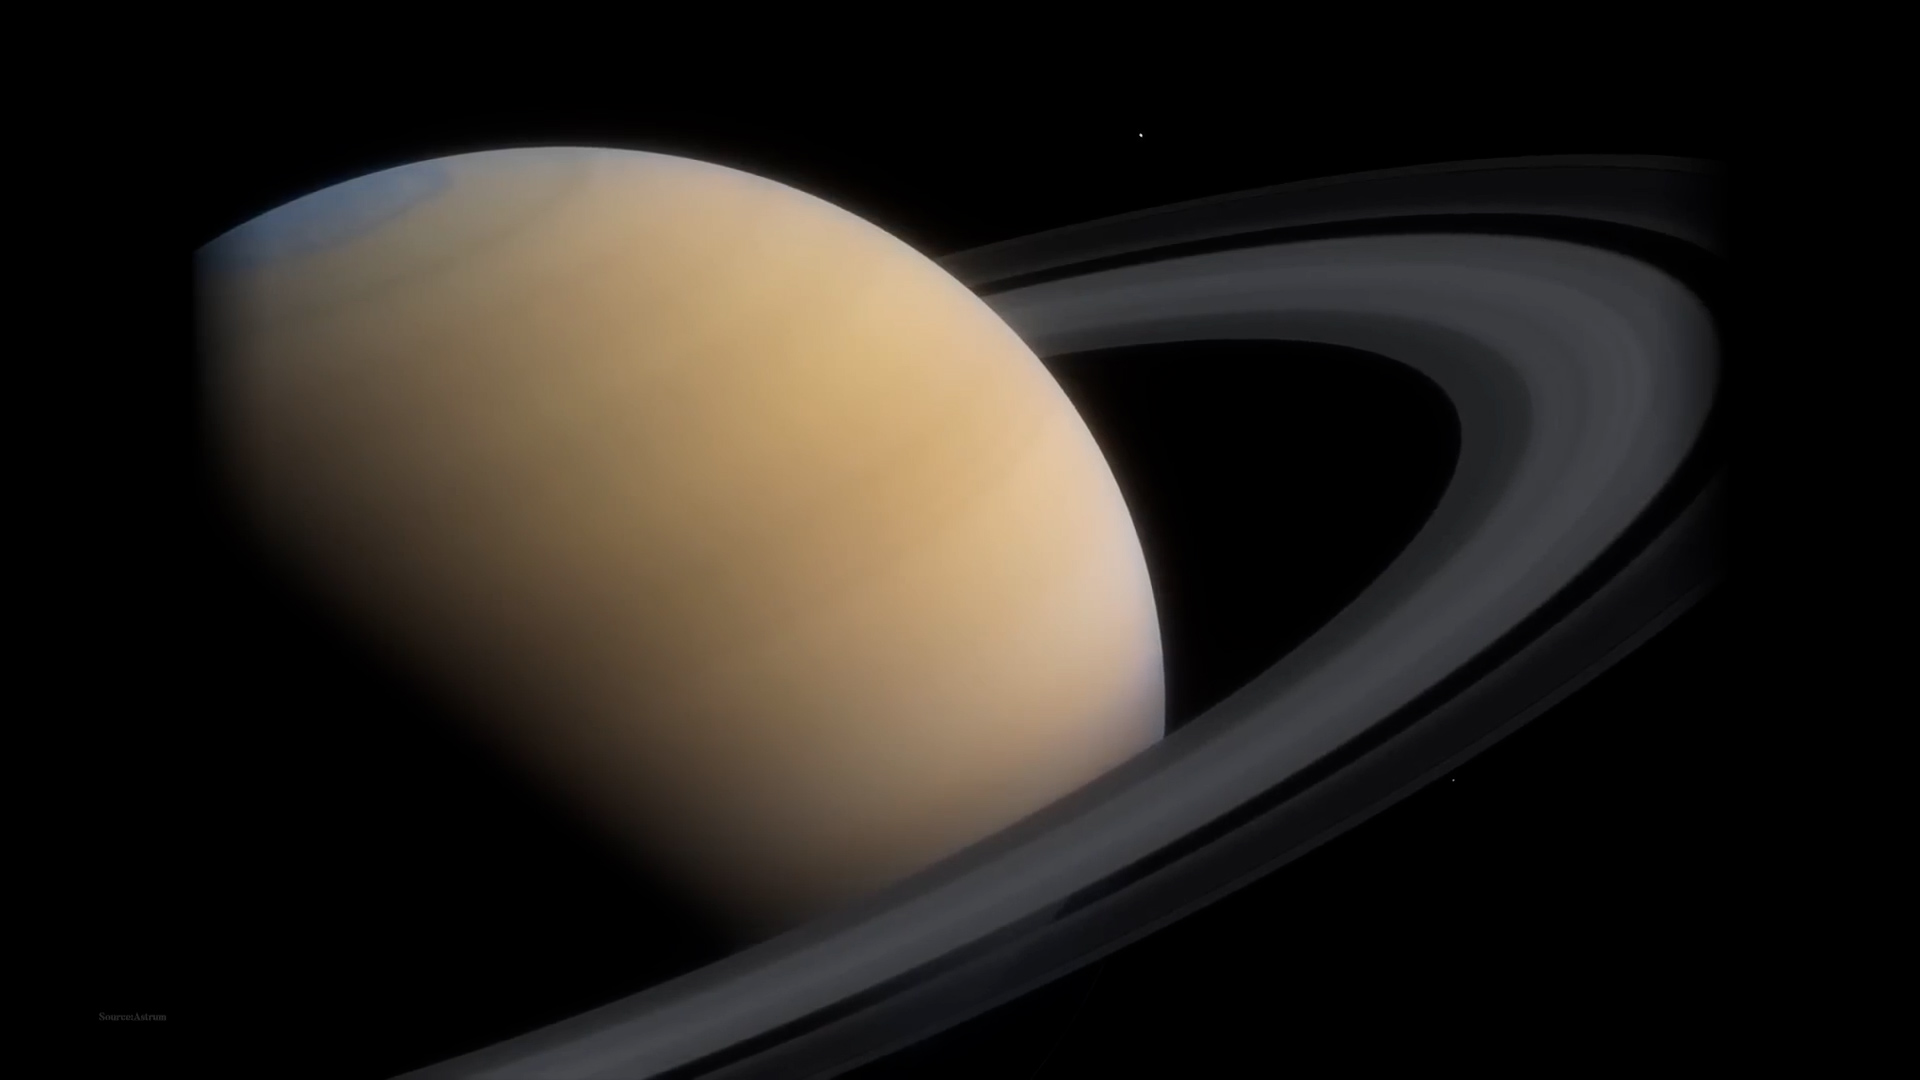 Sturn's ring will disappear from view in March 2025, NASA says. Scientists claim Saturn's rings will disappear soon.